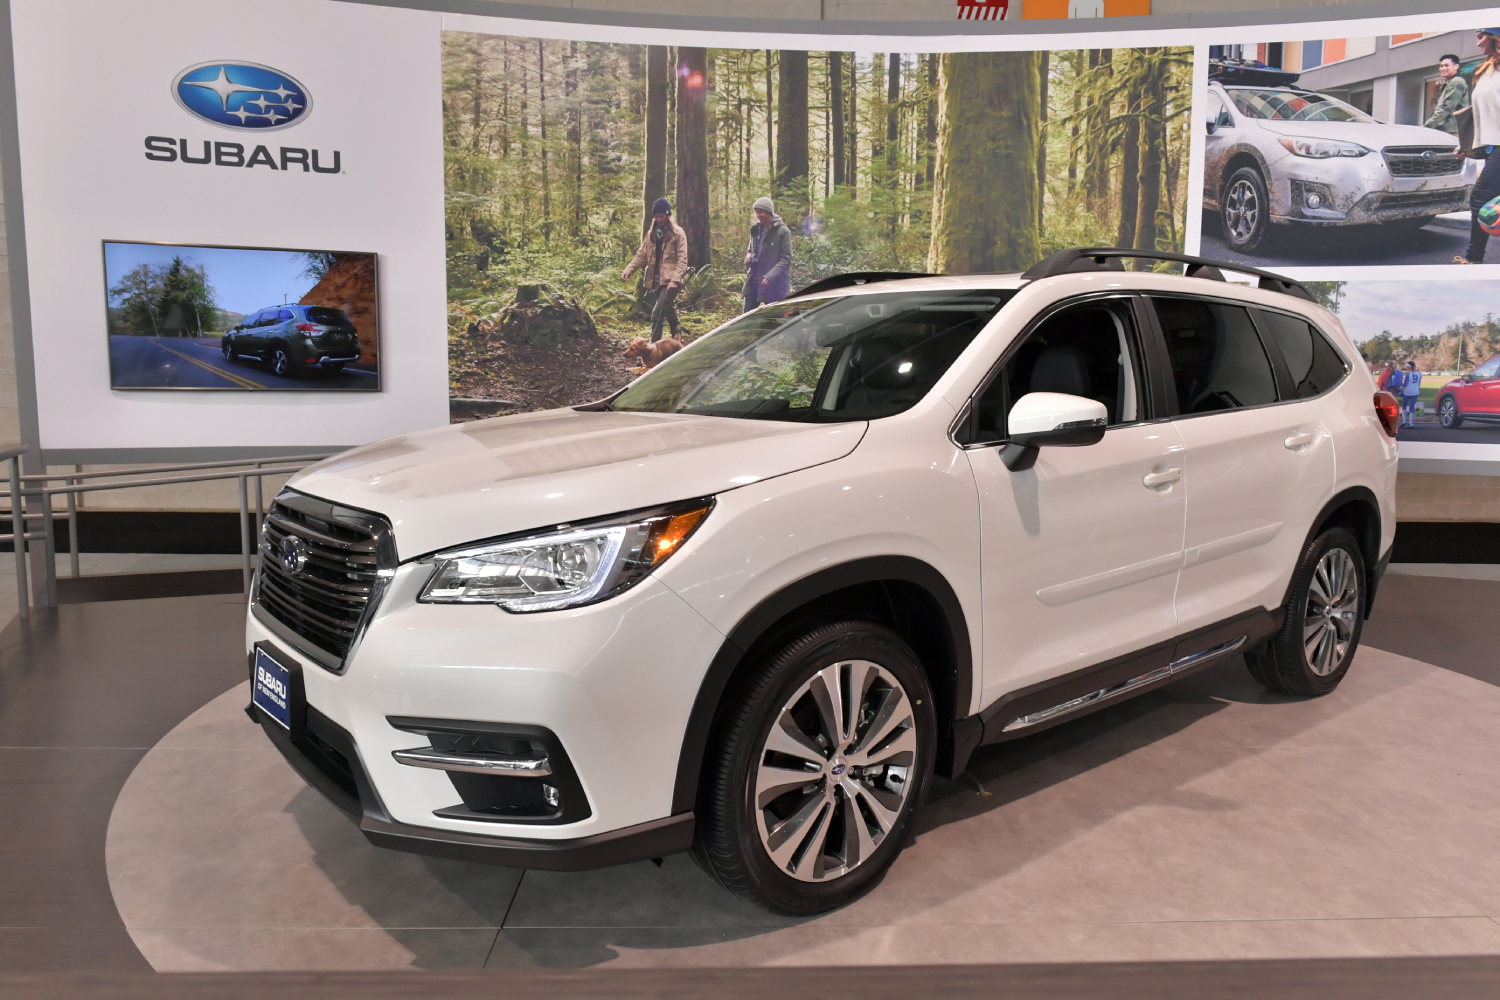 A white Subaru Ascent on display at an auto show